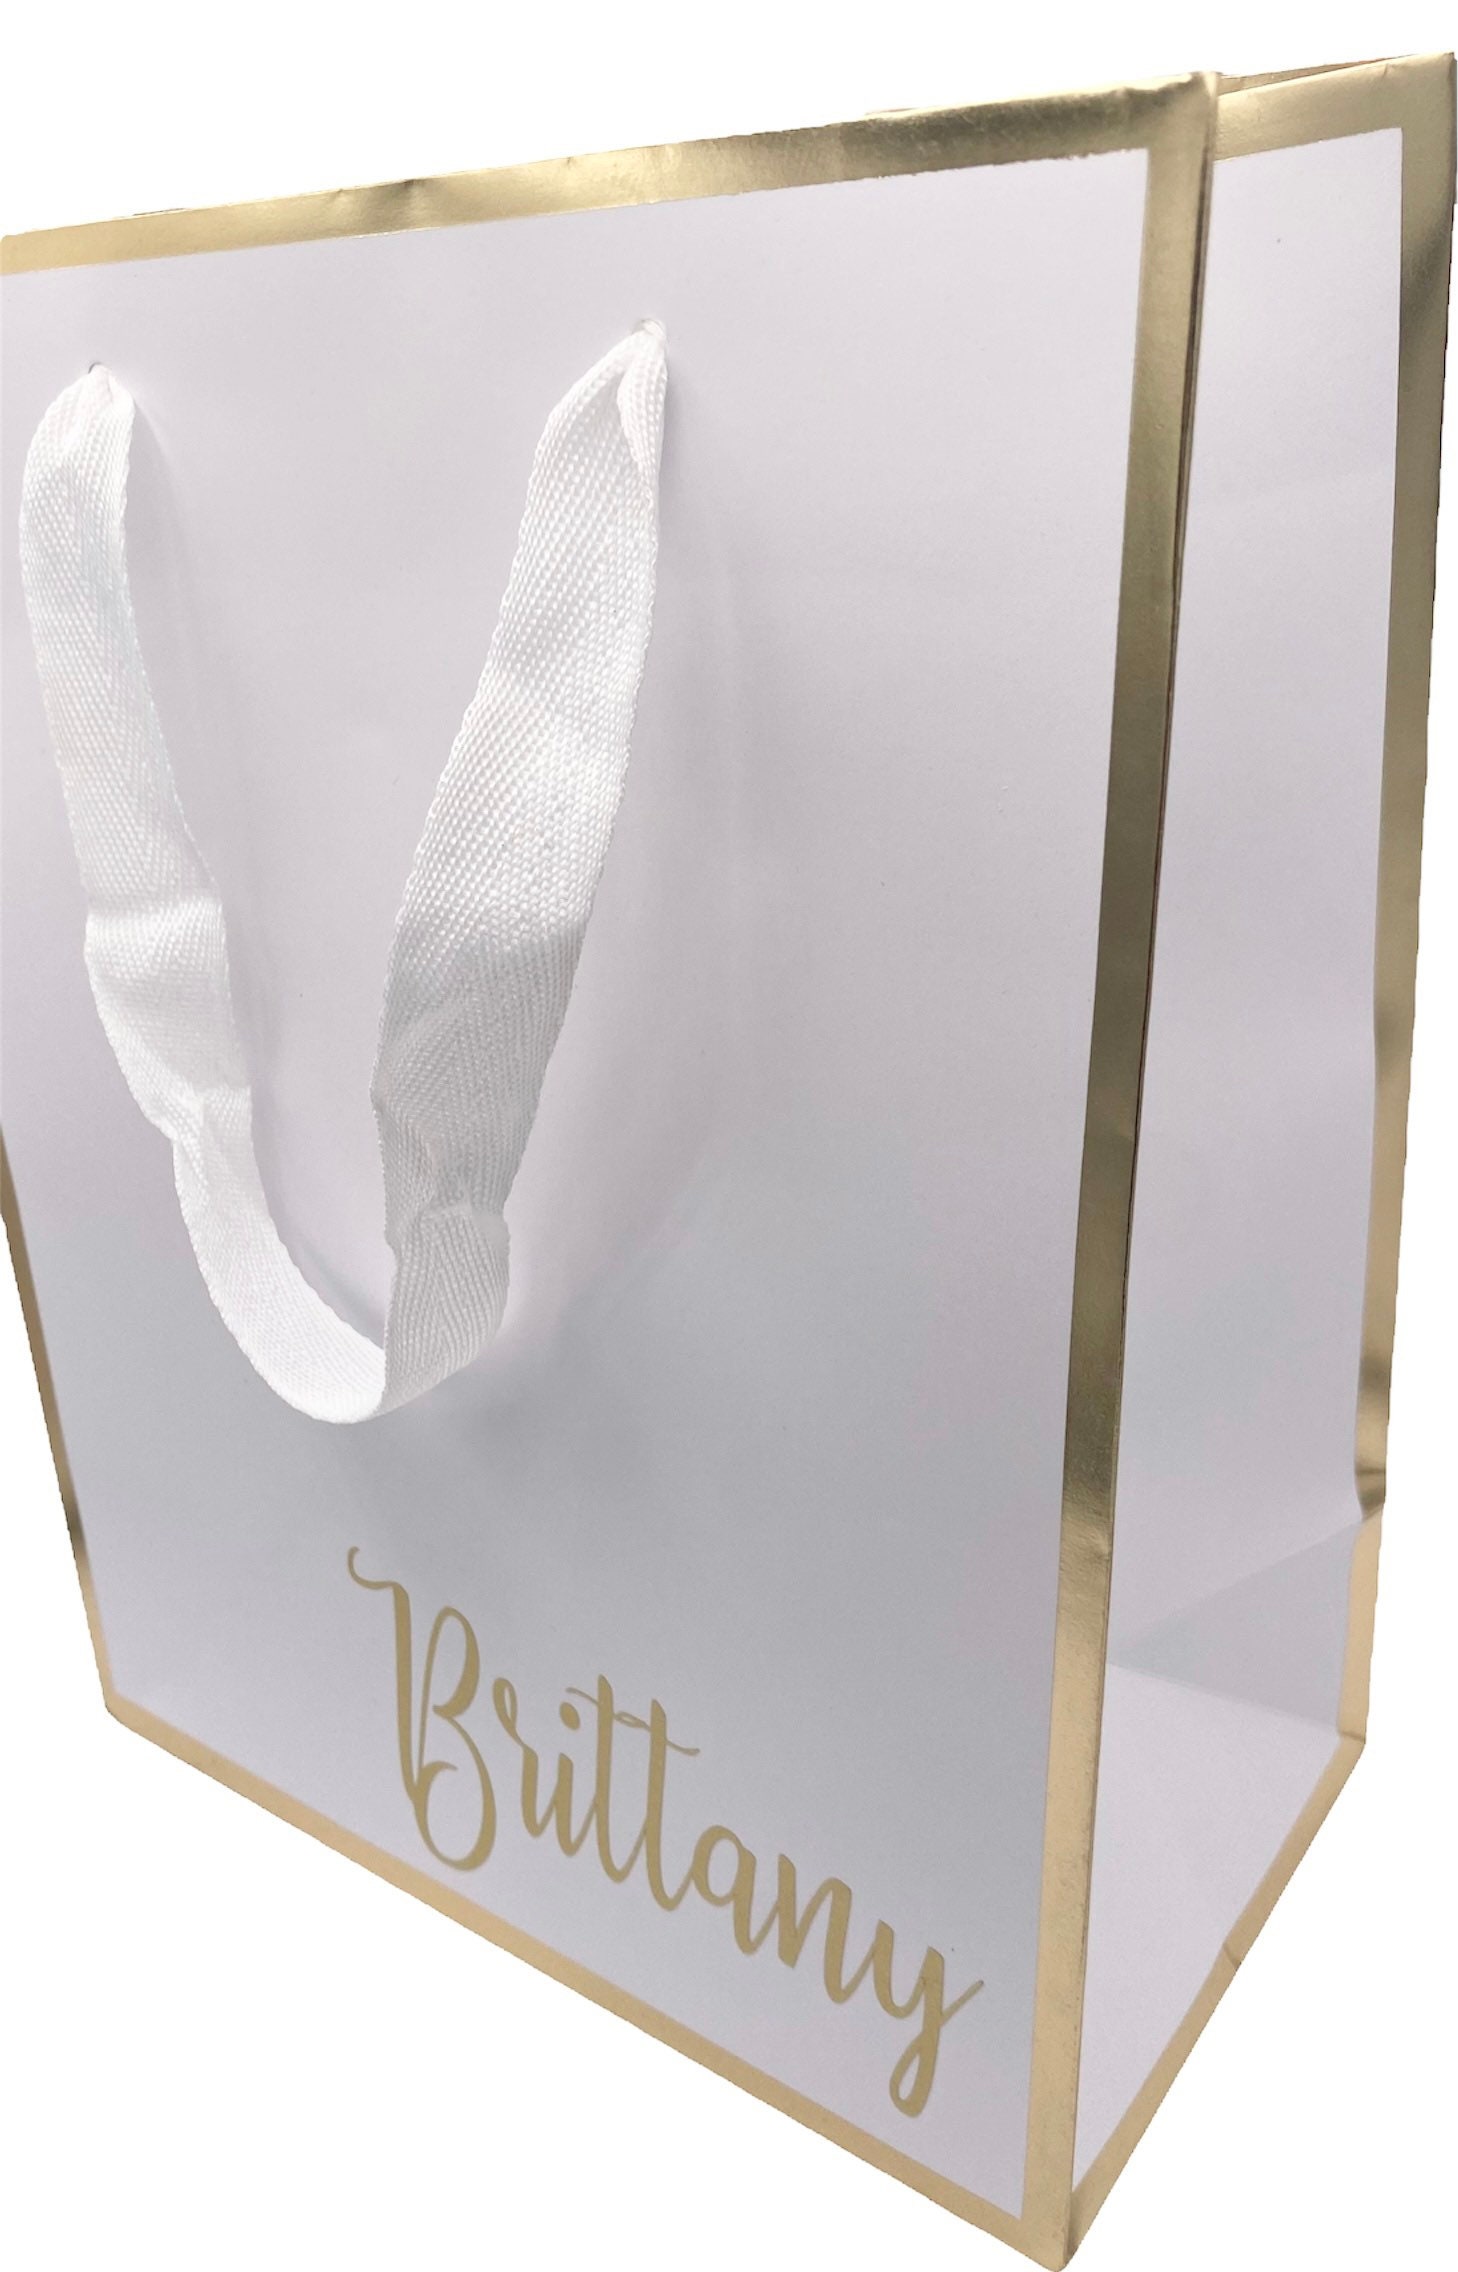 LUXURY GIFT BAGS Premium Personalized Gift Bags With Gold Trim Bridesmaid  Gift Bags Pink & Gold Gift Bags Bridal Shower Favor Bags 